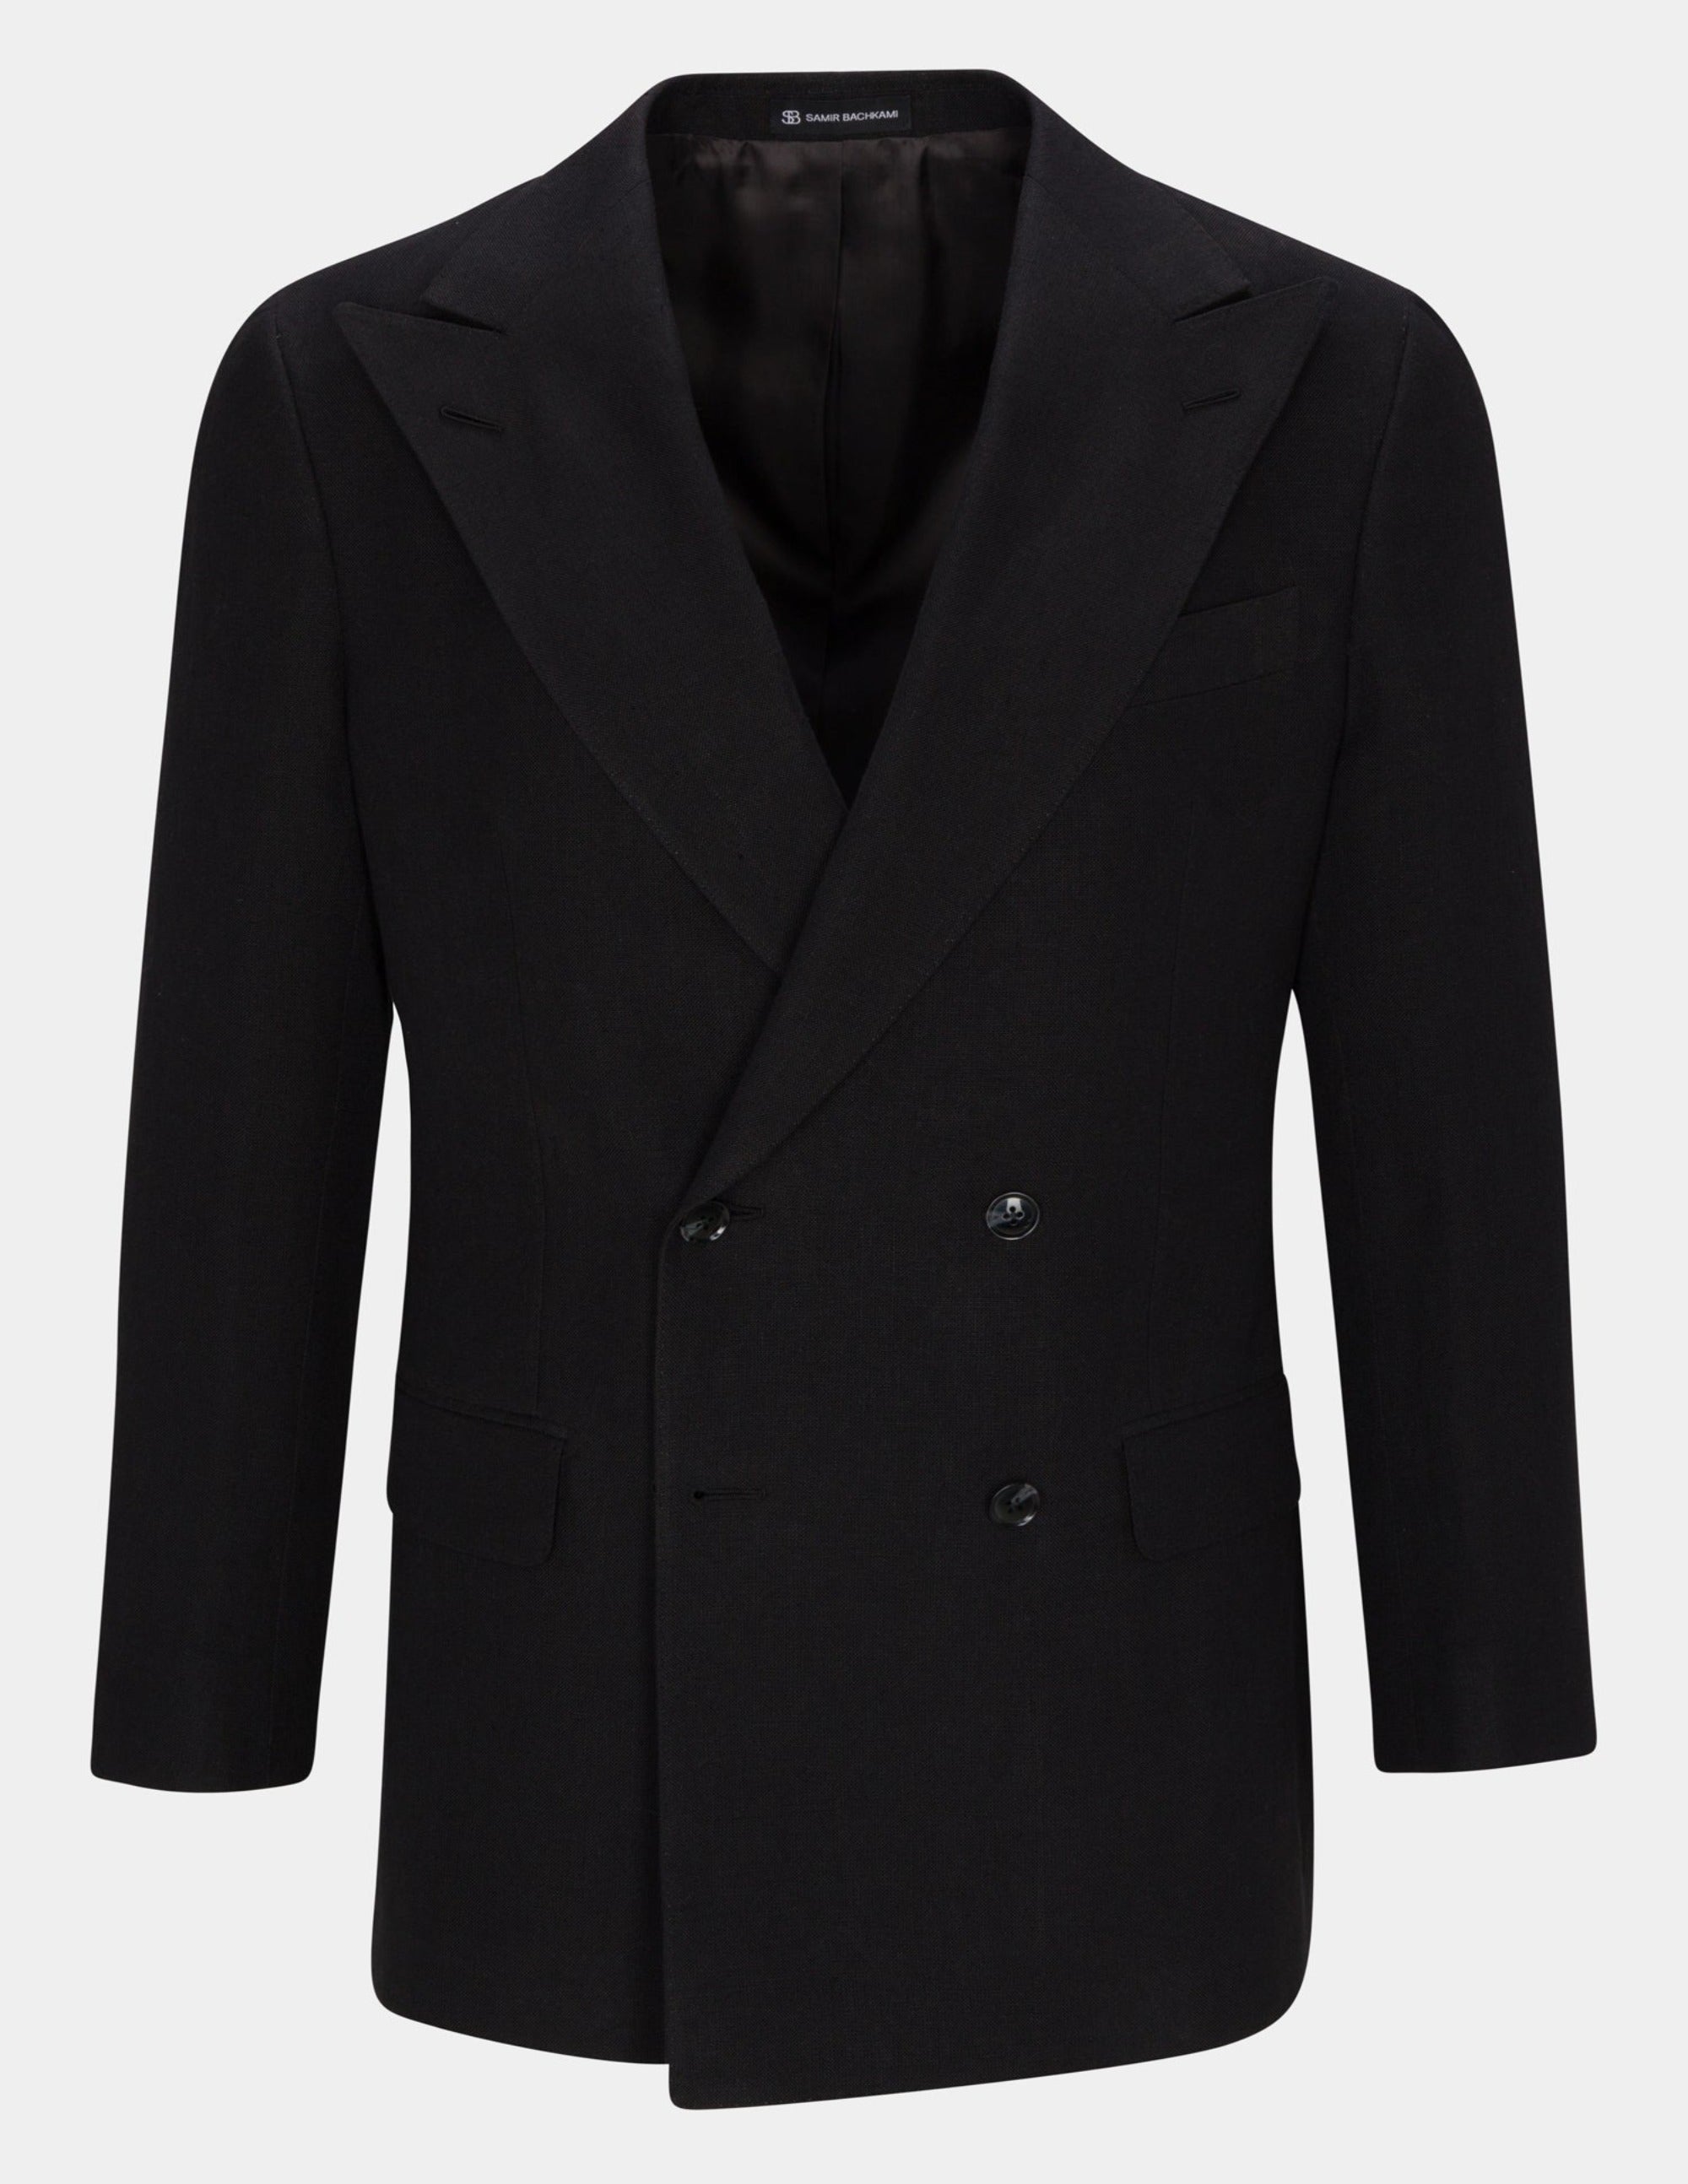 Black Linen Double Breasted Suit - Samir Bachkami